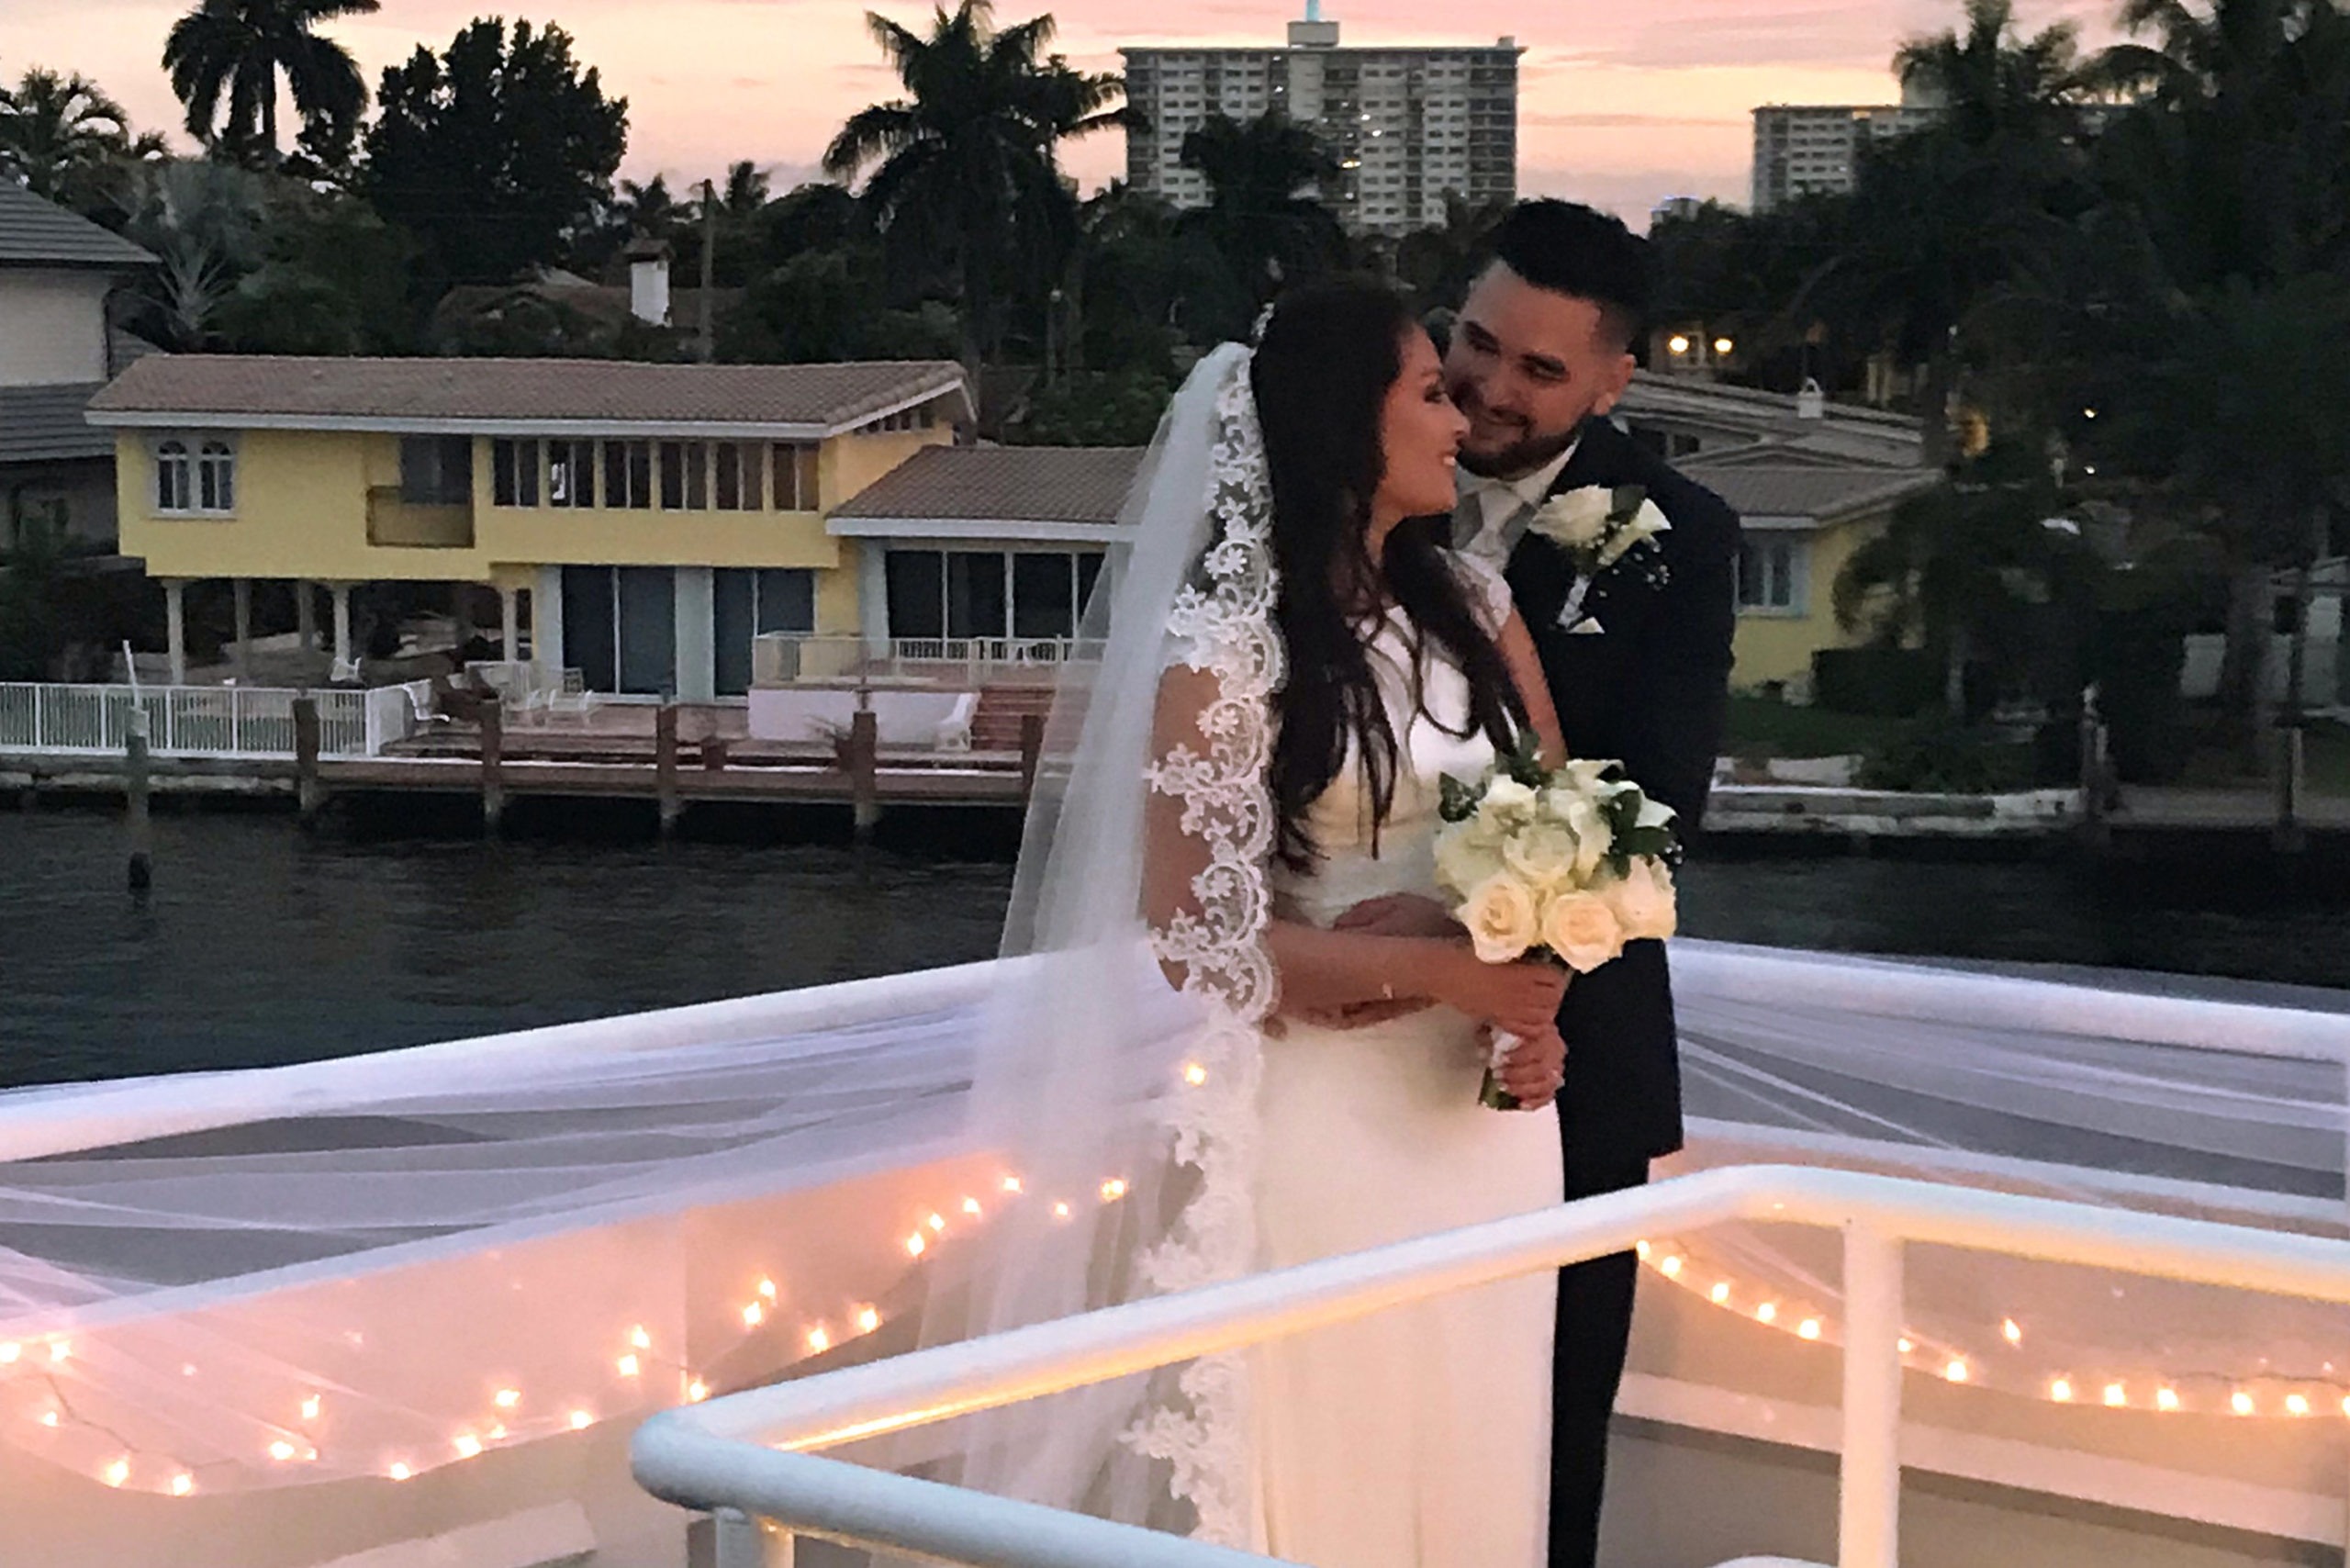 Wedding Cruises in Miami and South Florida